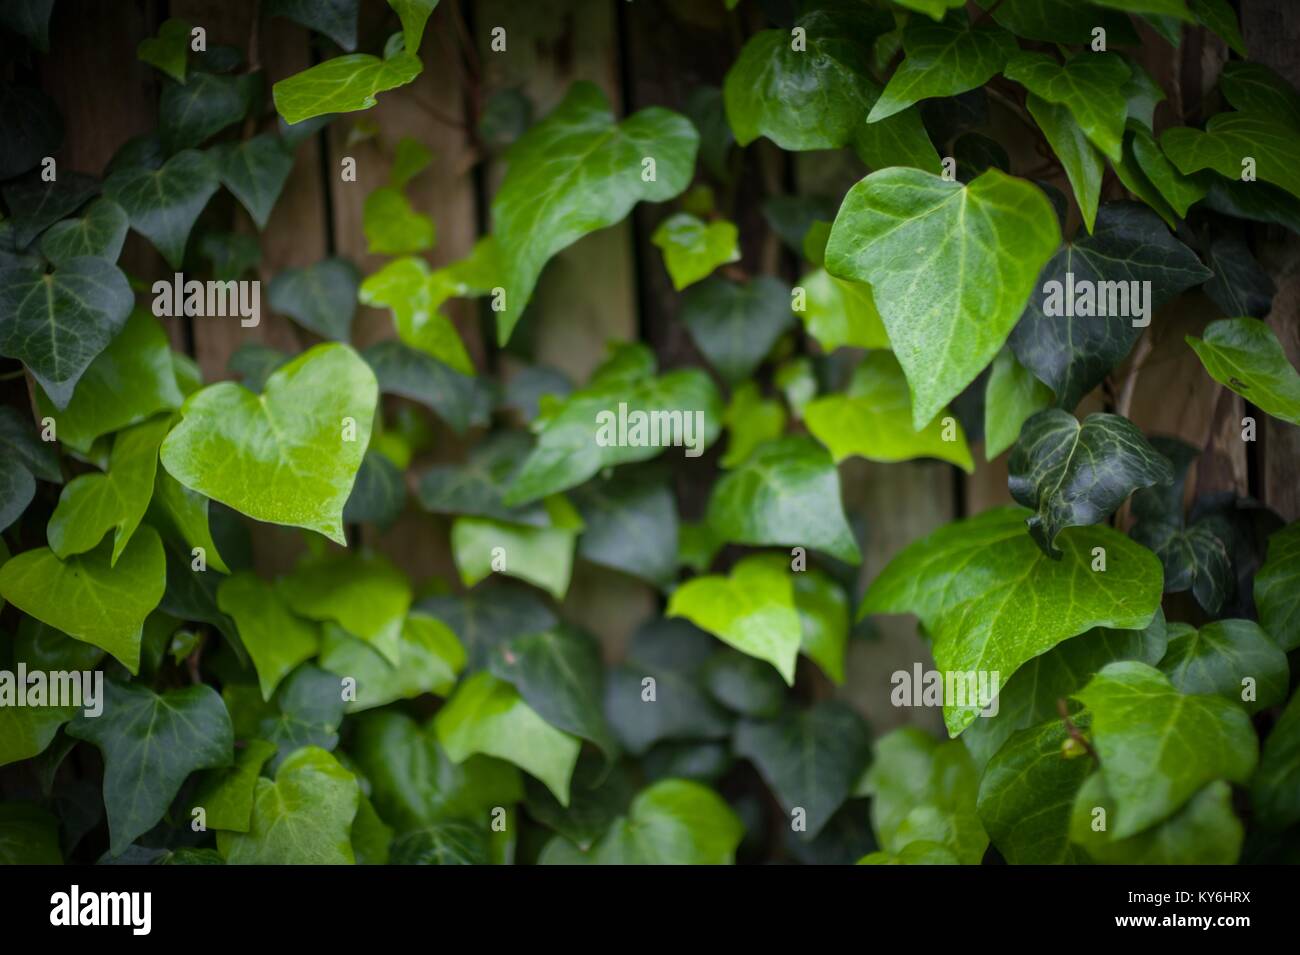 Ivy leaves growing on a wall in Durbanville, Cape Town, South Africa. Stock Photo